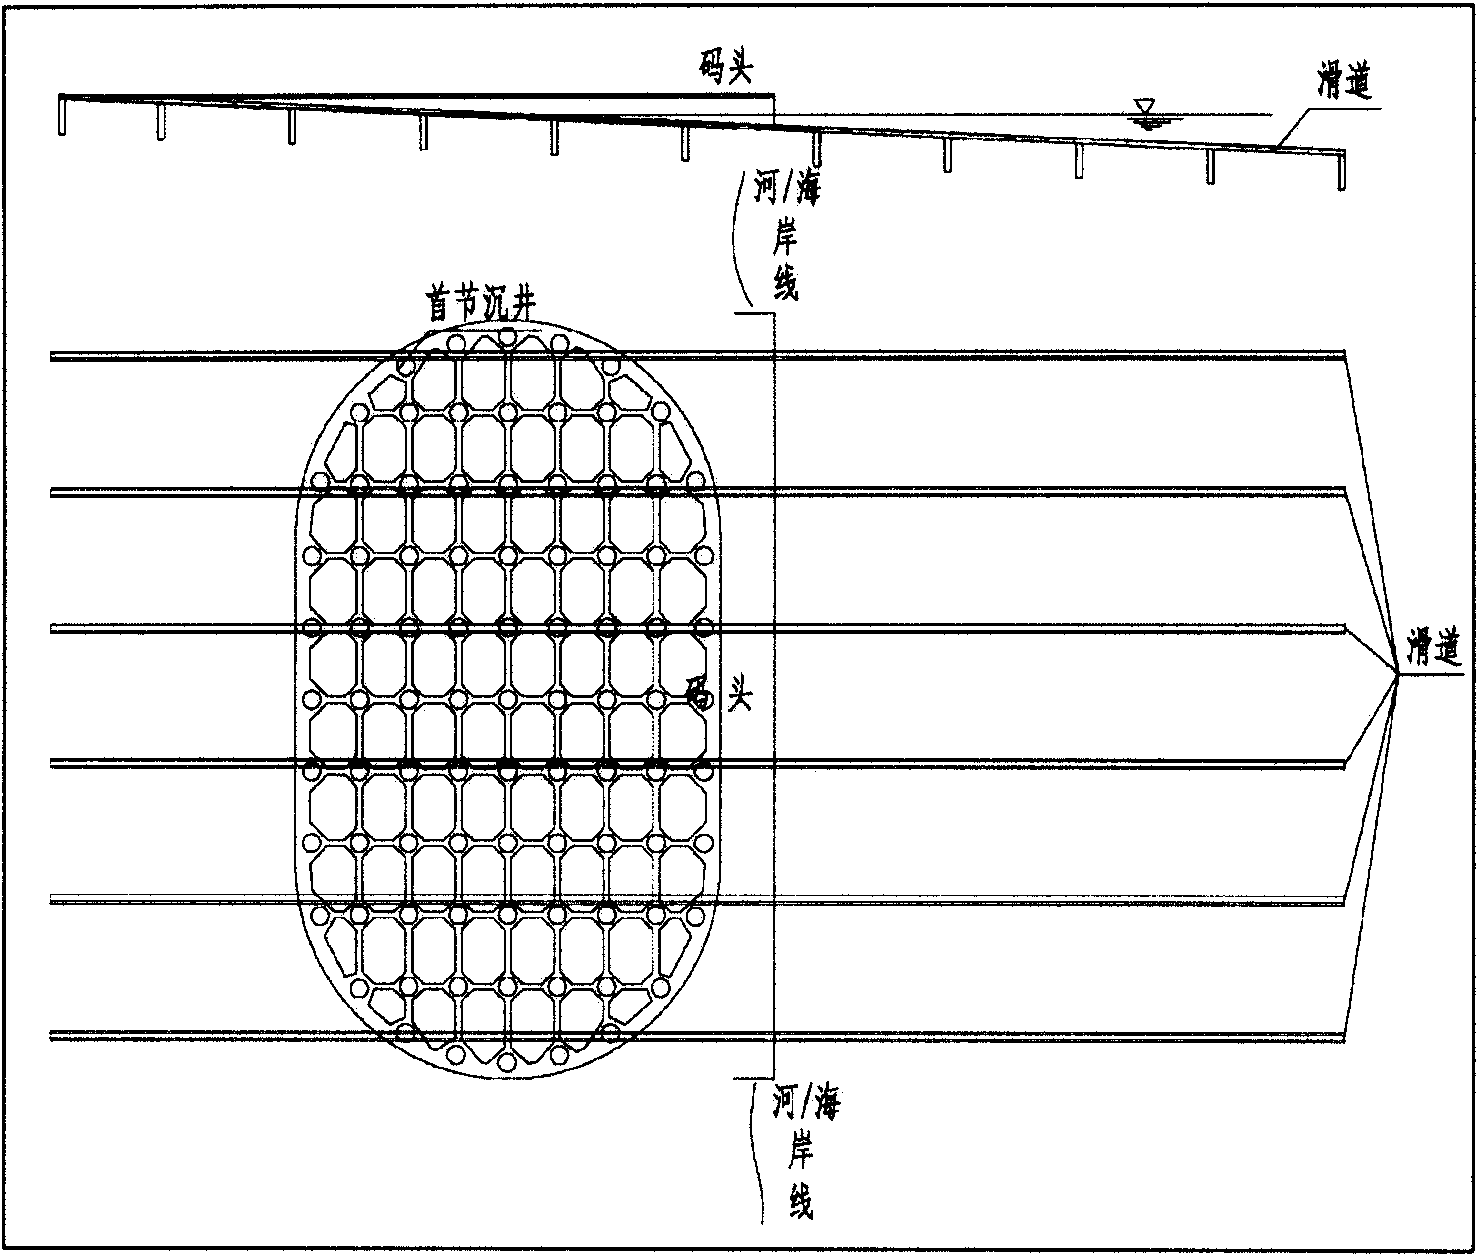 Bridge composite foundation consisting of open caisson and pile and construction method